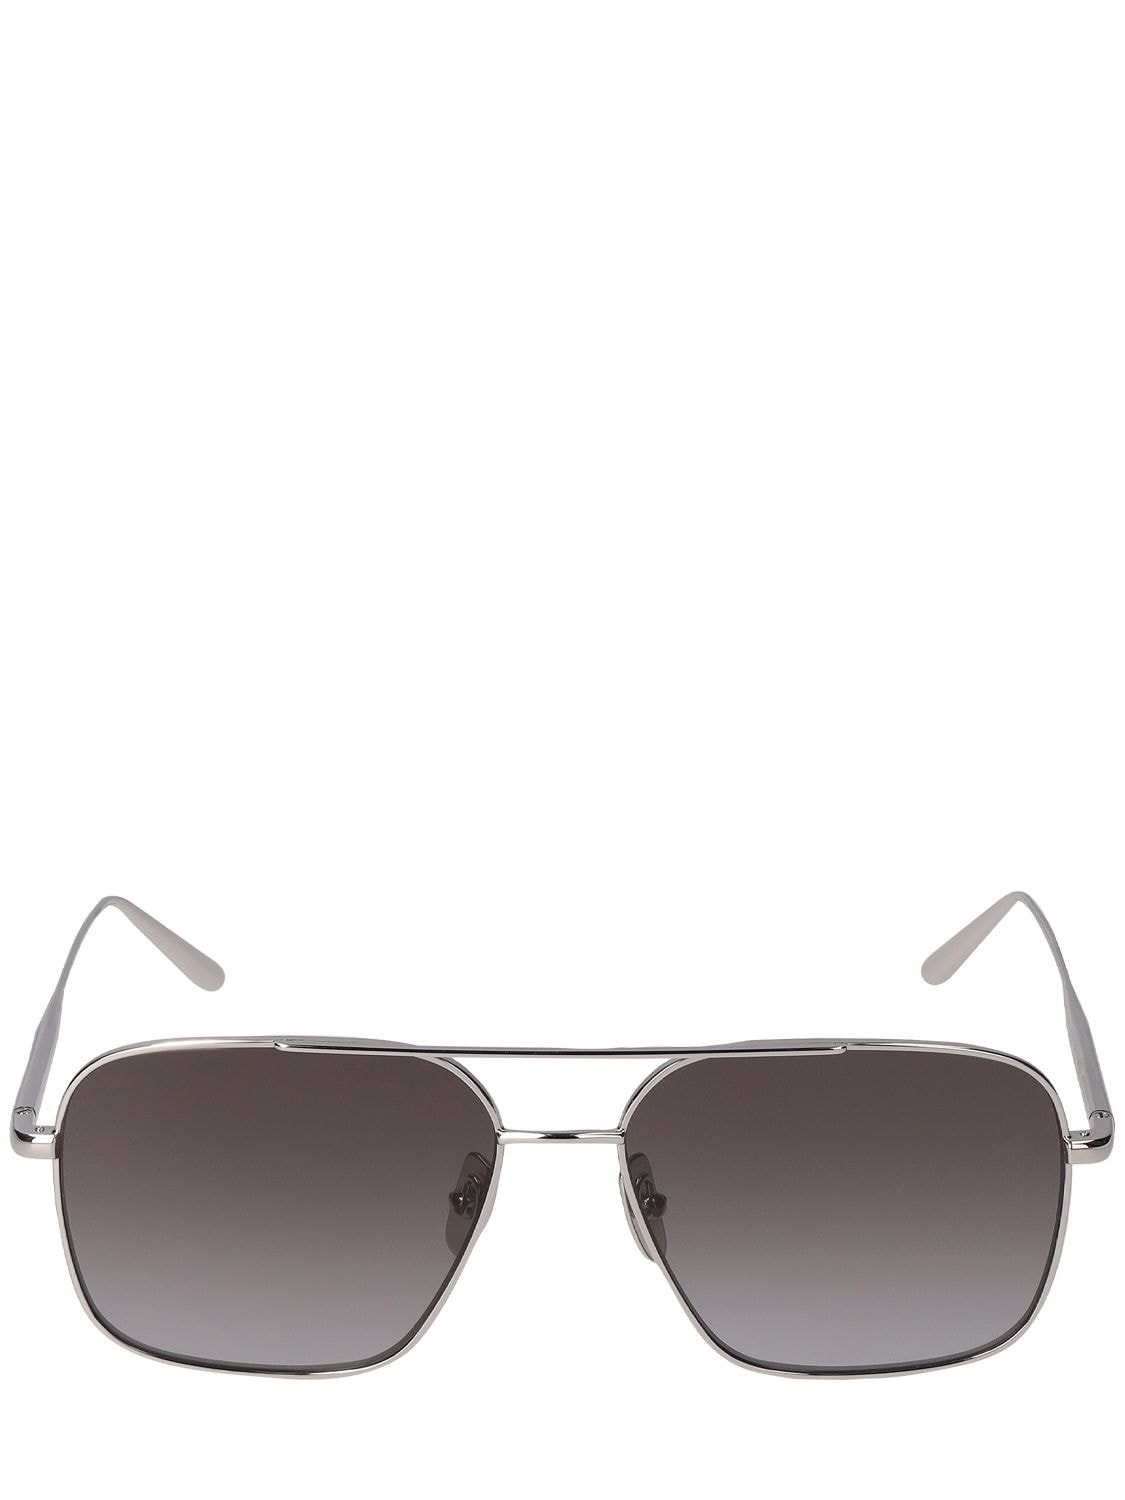 Chimi Aviator Grey Stainless Steel Sunglasses In Silver,grey